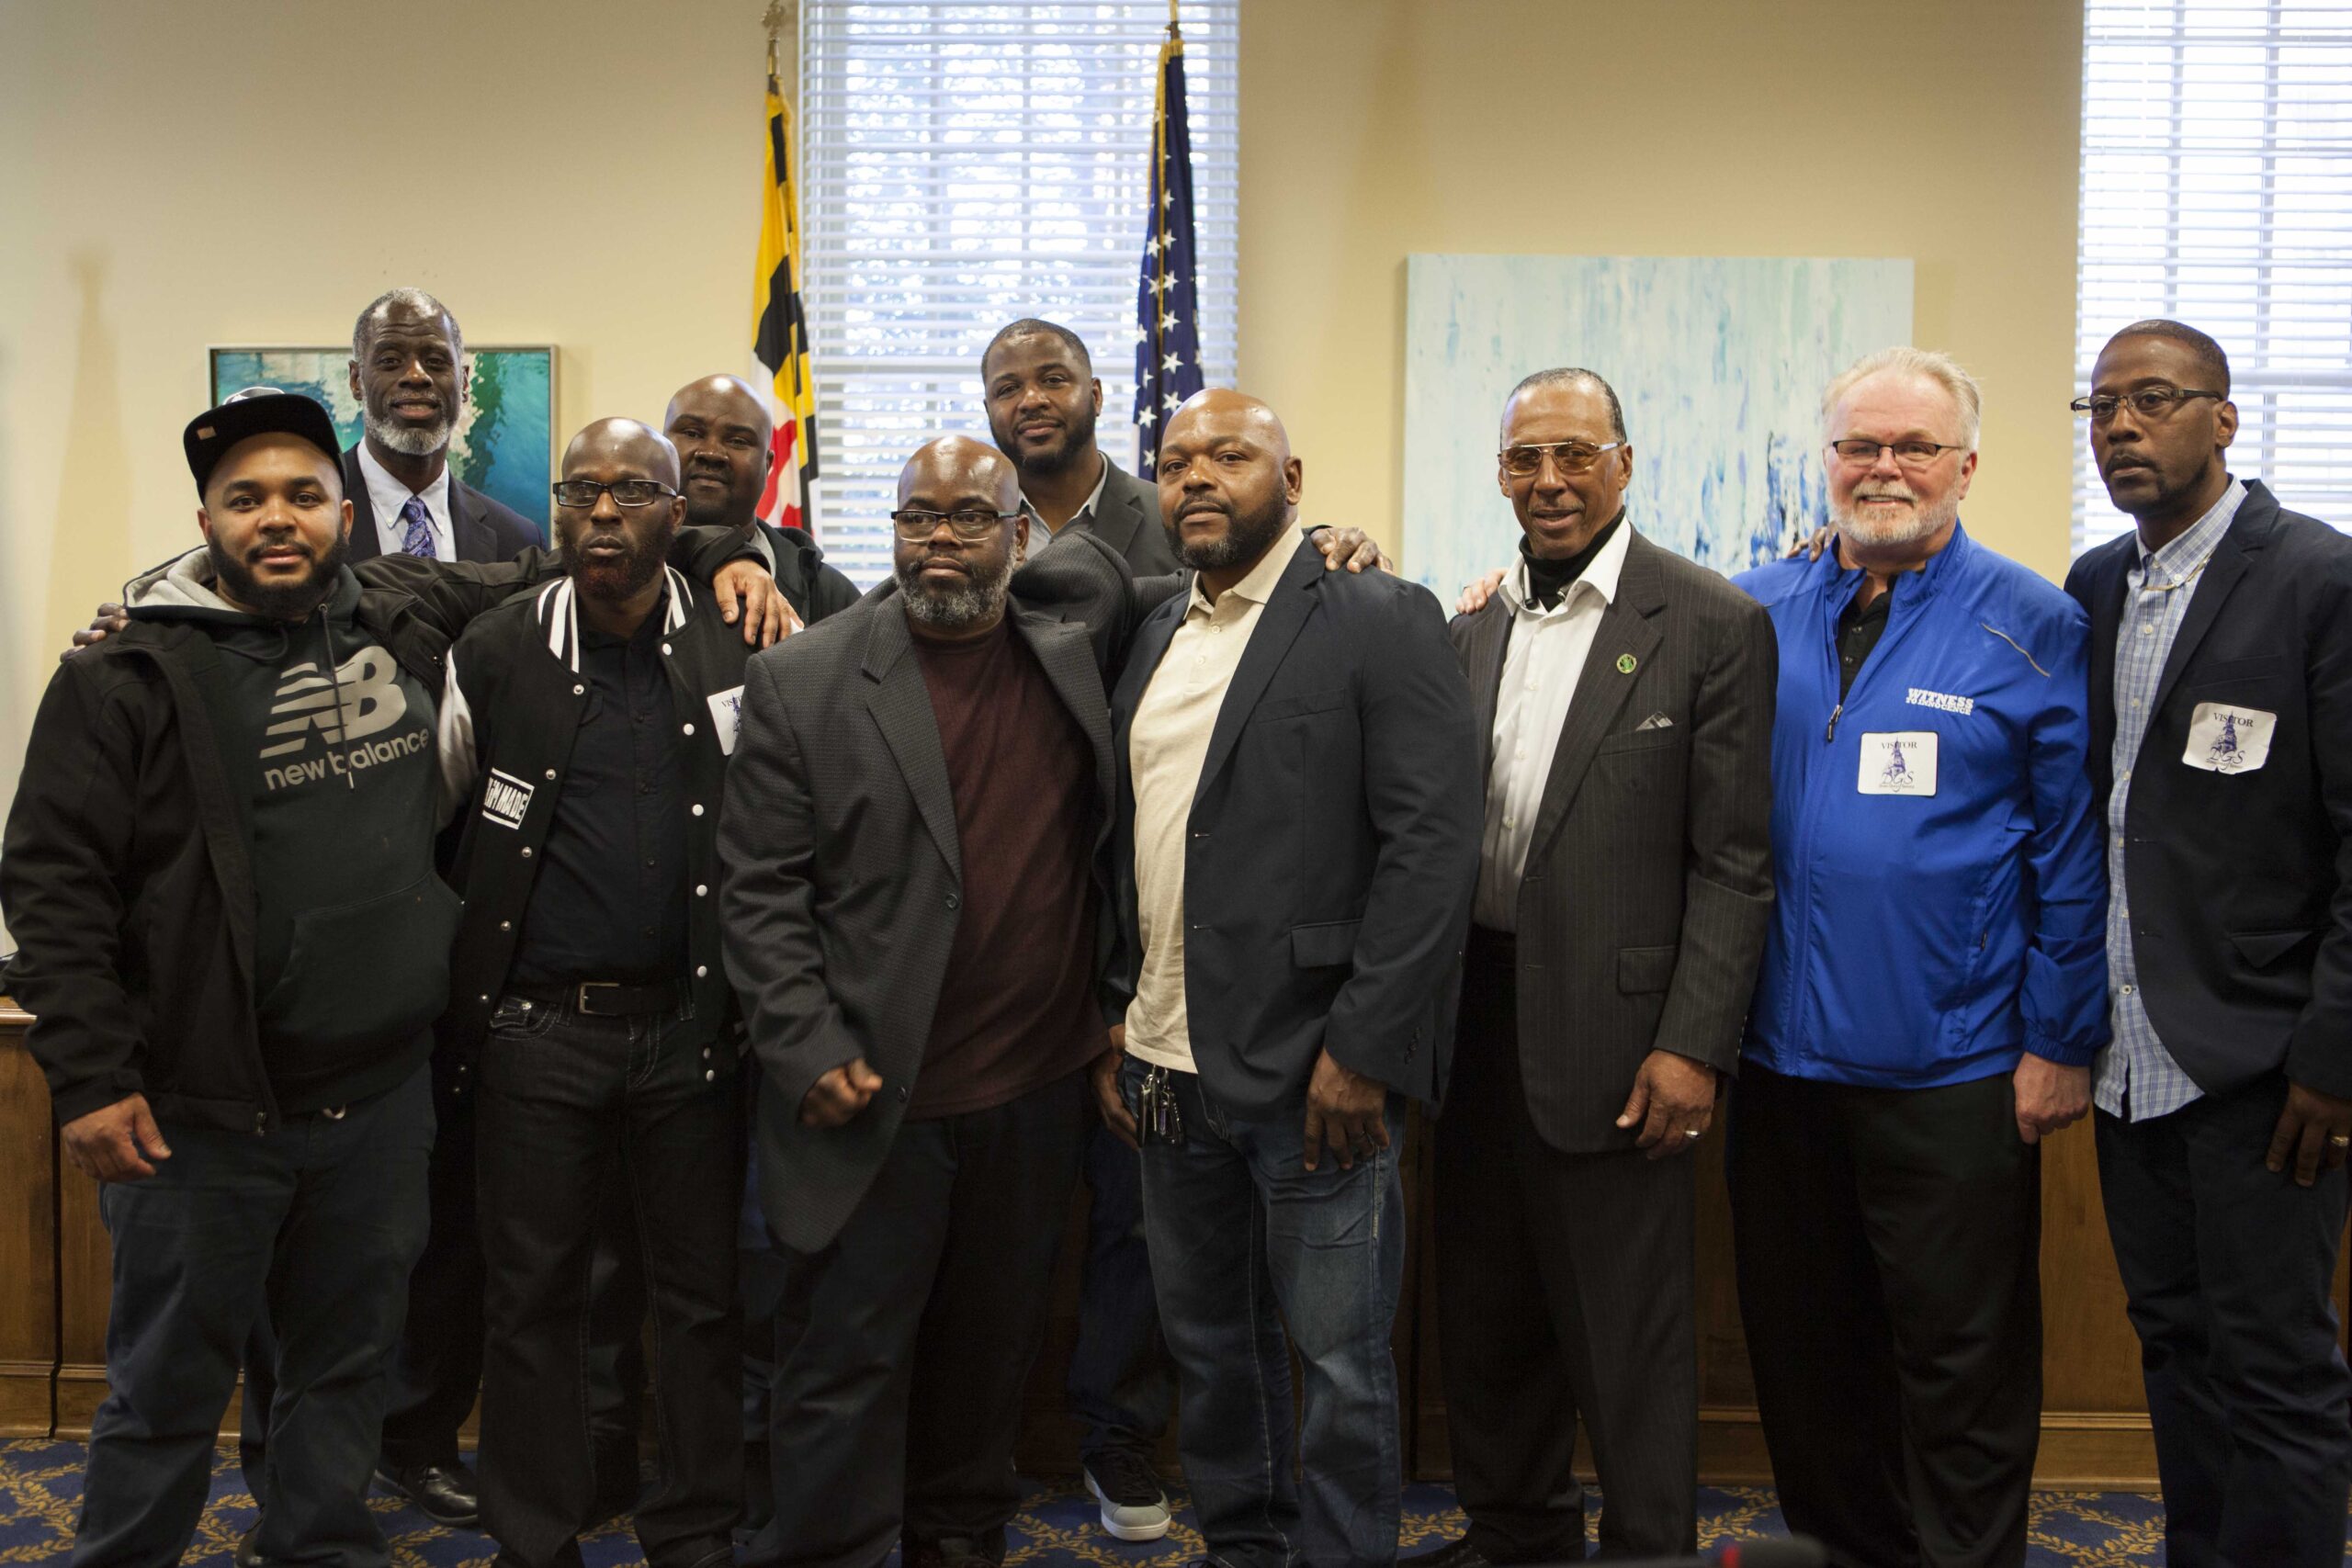 Exonerees from Maryland gather at the State House to share their stories in January 2020. Pictured from left to right: Demetrius Smith, Ransom Watkins, Eric Simmons, Lamar Johnson, Kenneth JR McPherson, Jermaine Arrington, Clarence Shipley, Walter Lomax, Kirk Bloodsworth, and Alfred Chestnut. (Image: Daniele Selby/Innocence Project)